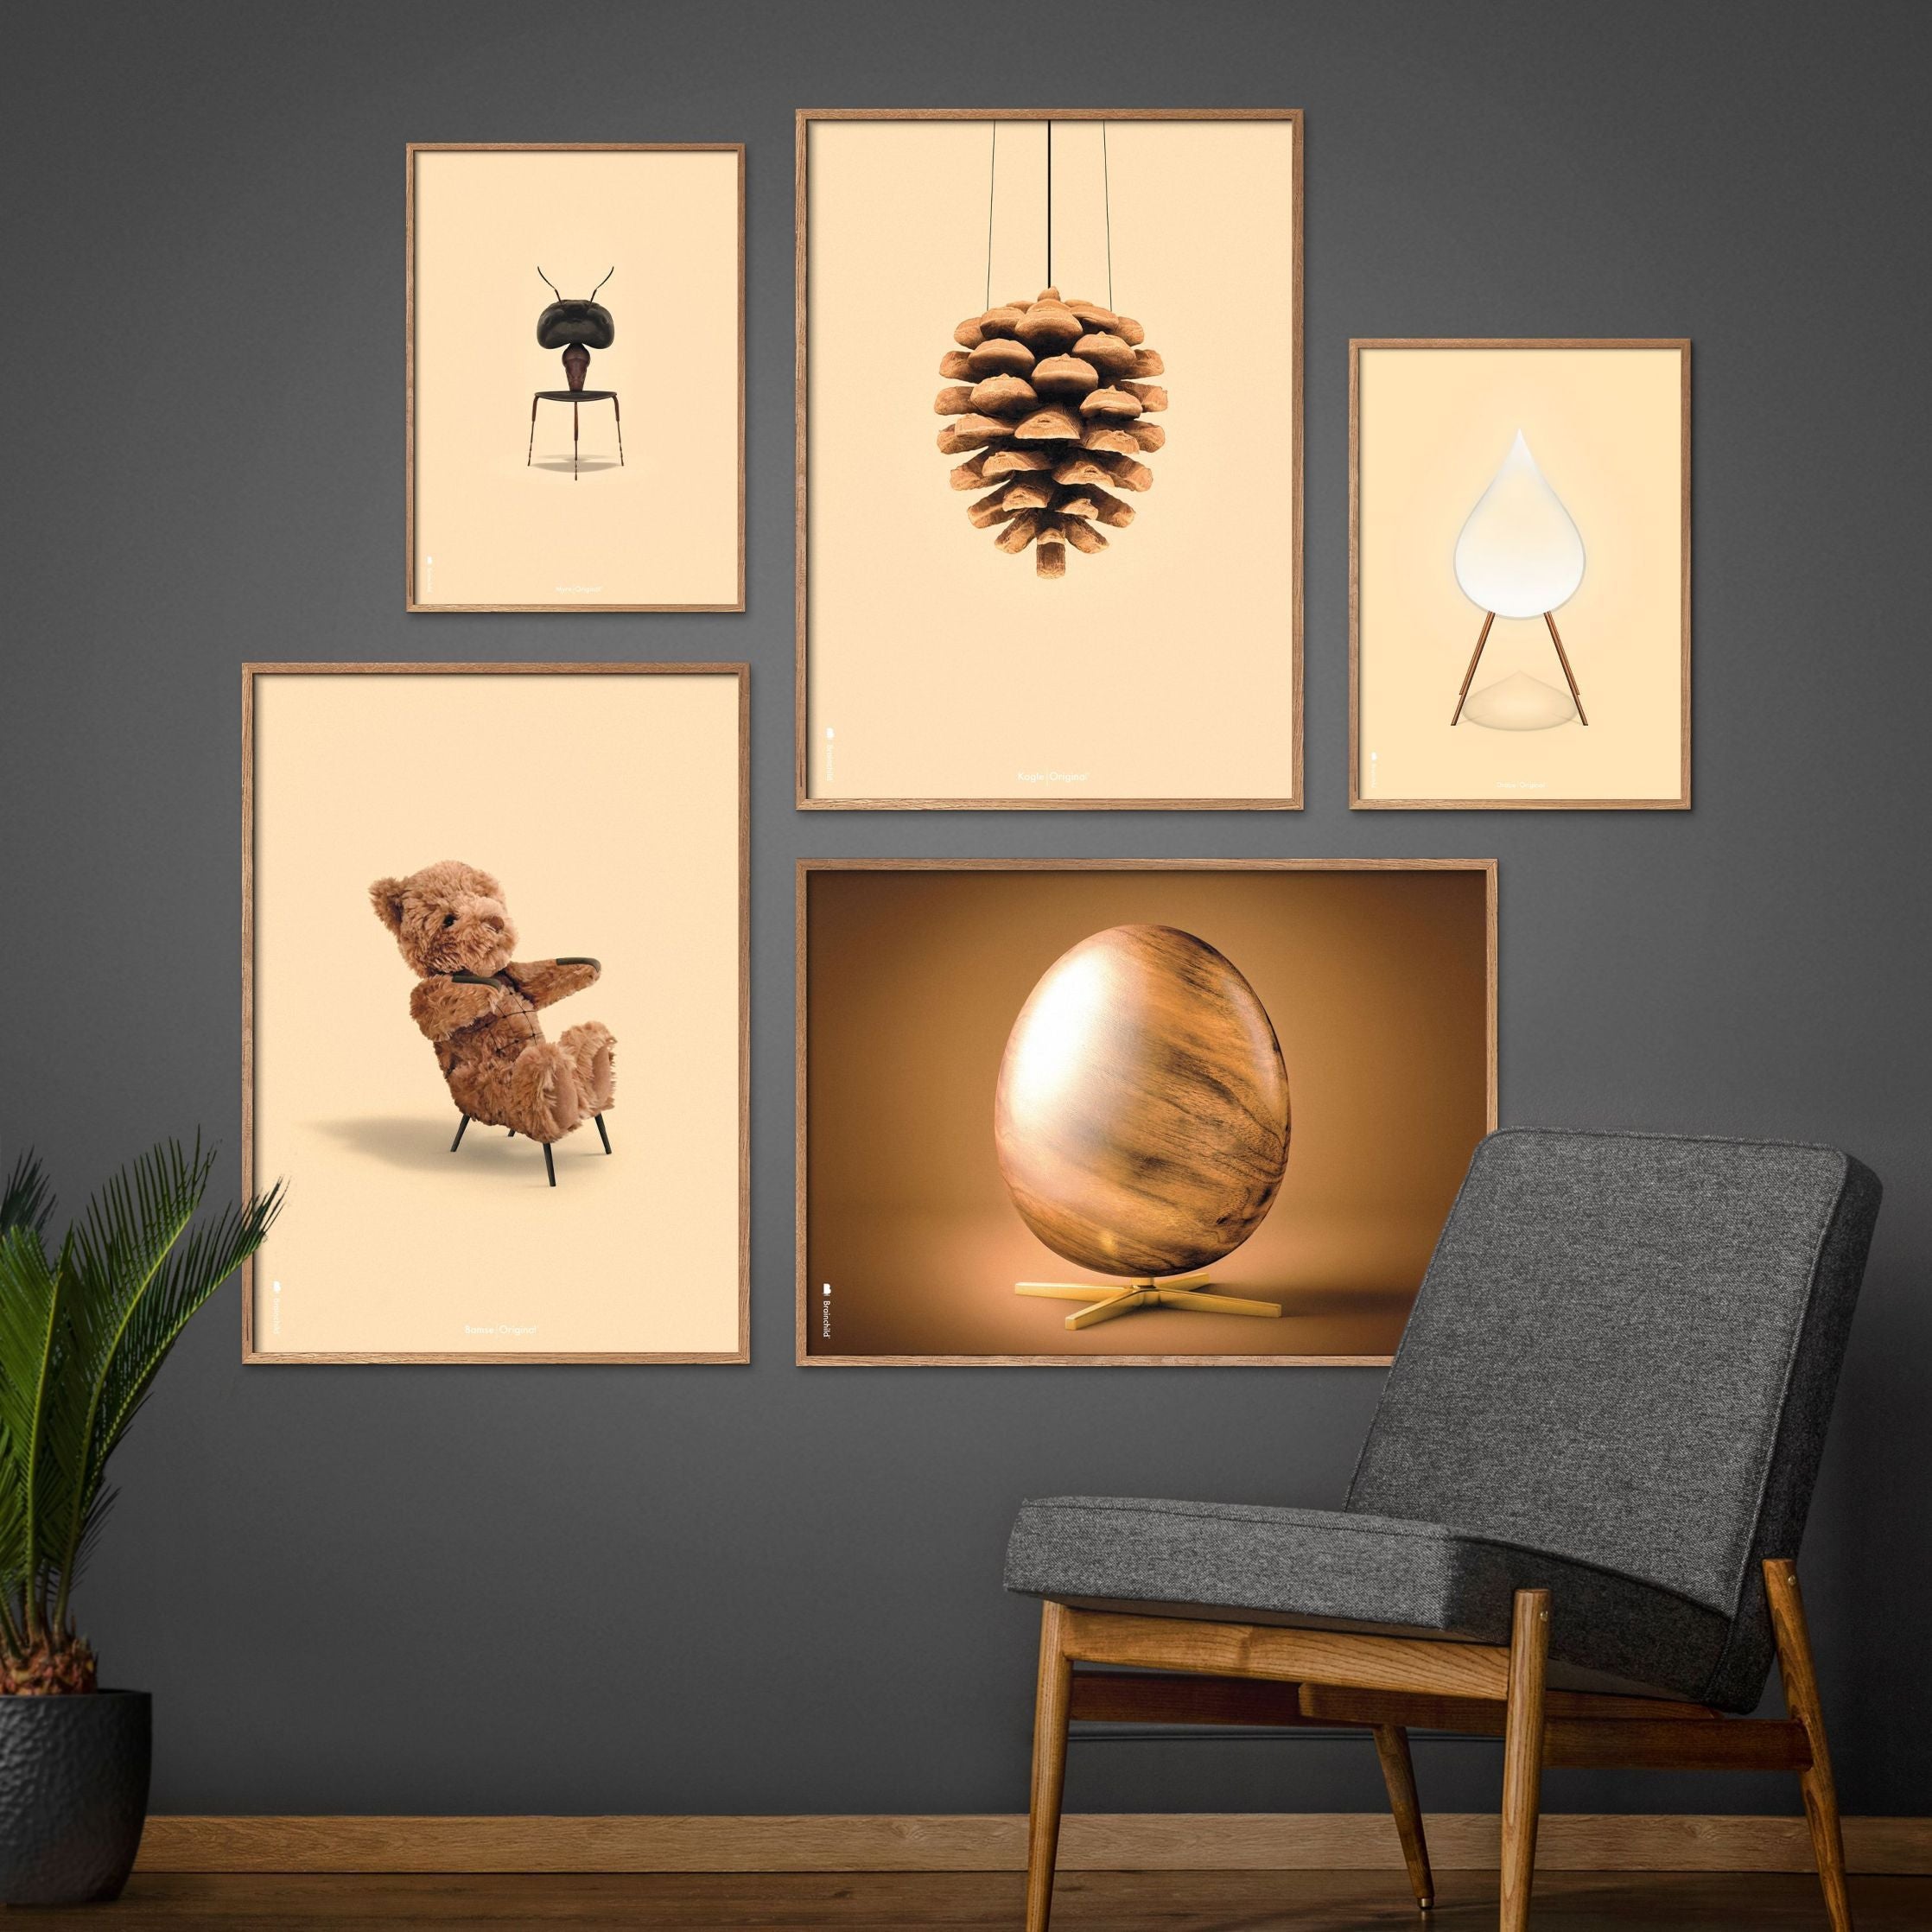 Brainchild Teddy Bear Classic Poster, Frame Made Of Dark Wood 30x40 Cm, Sand Colored Background